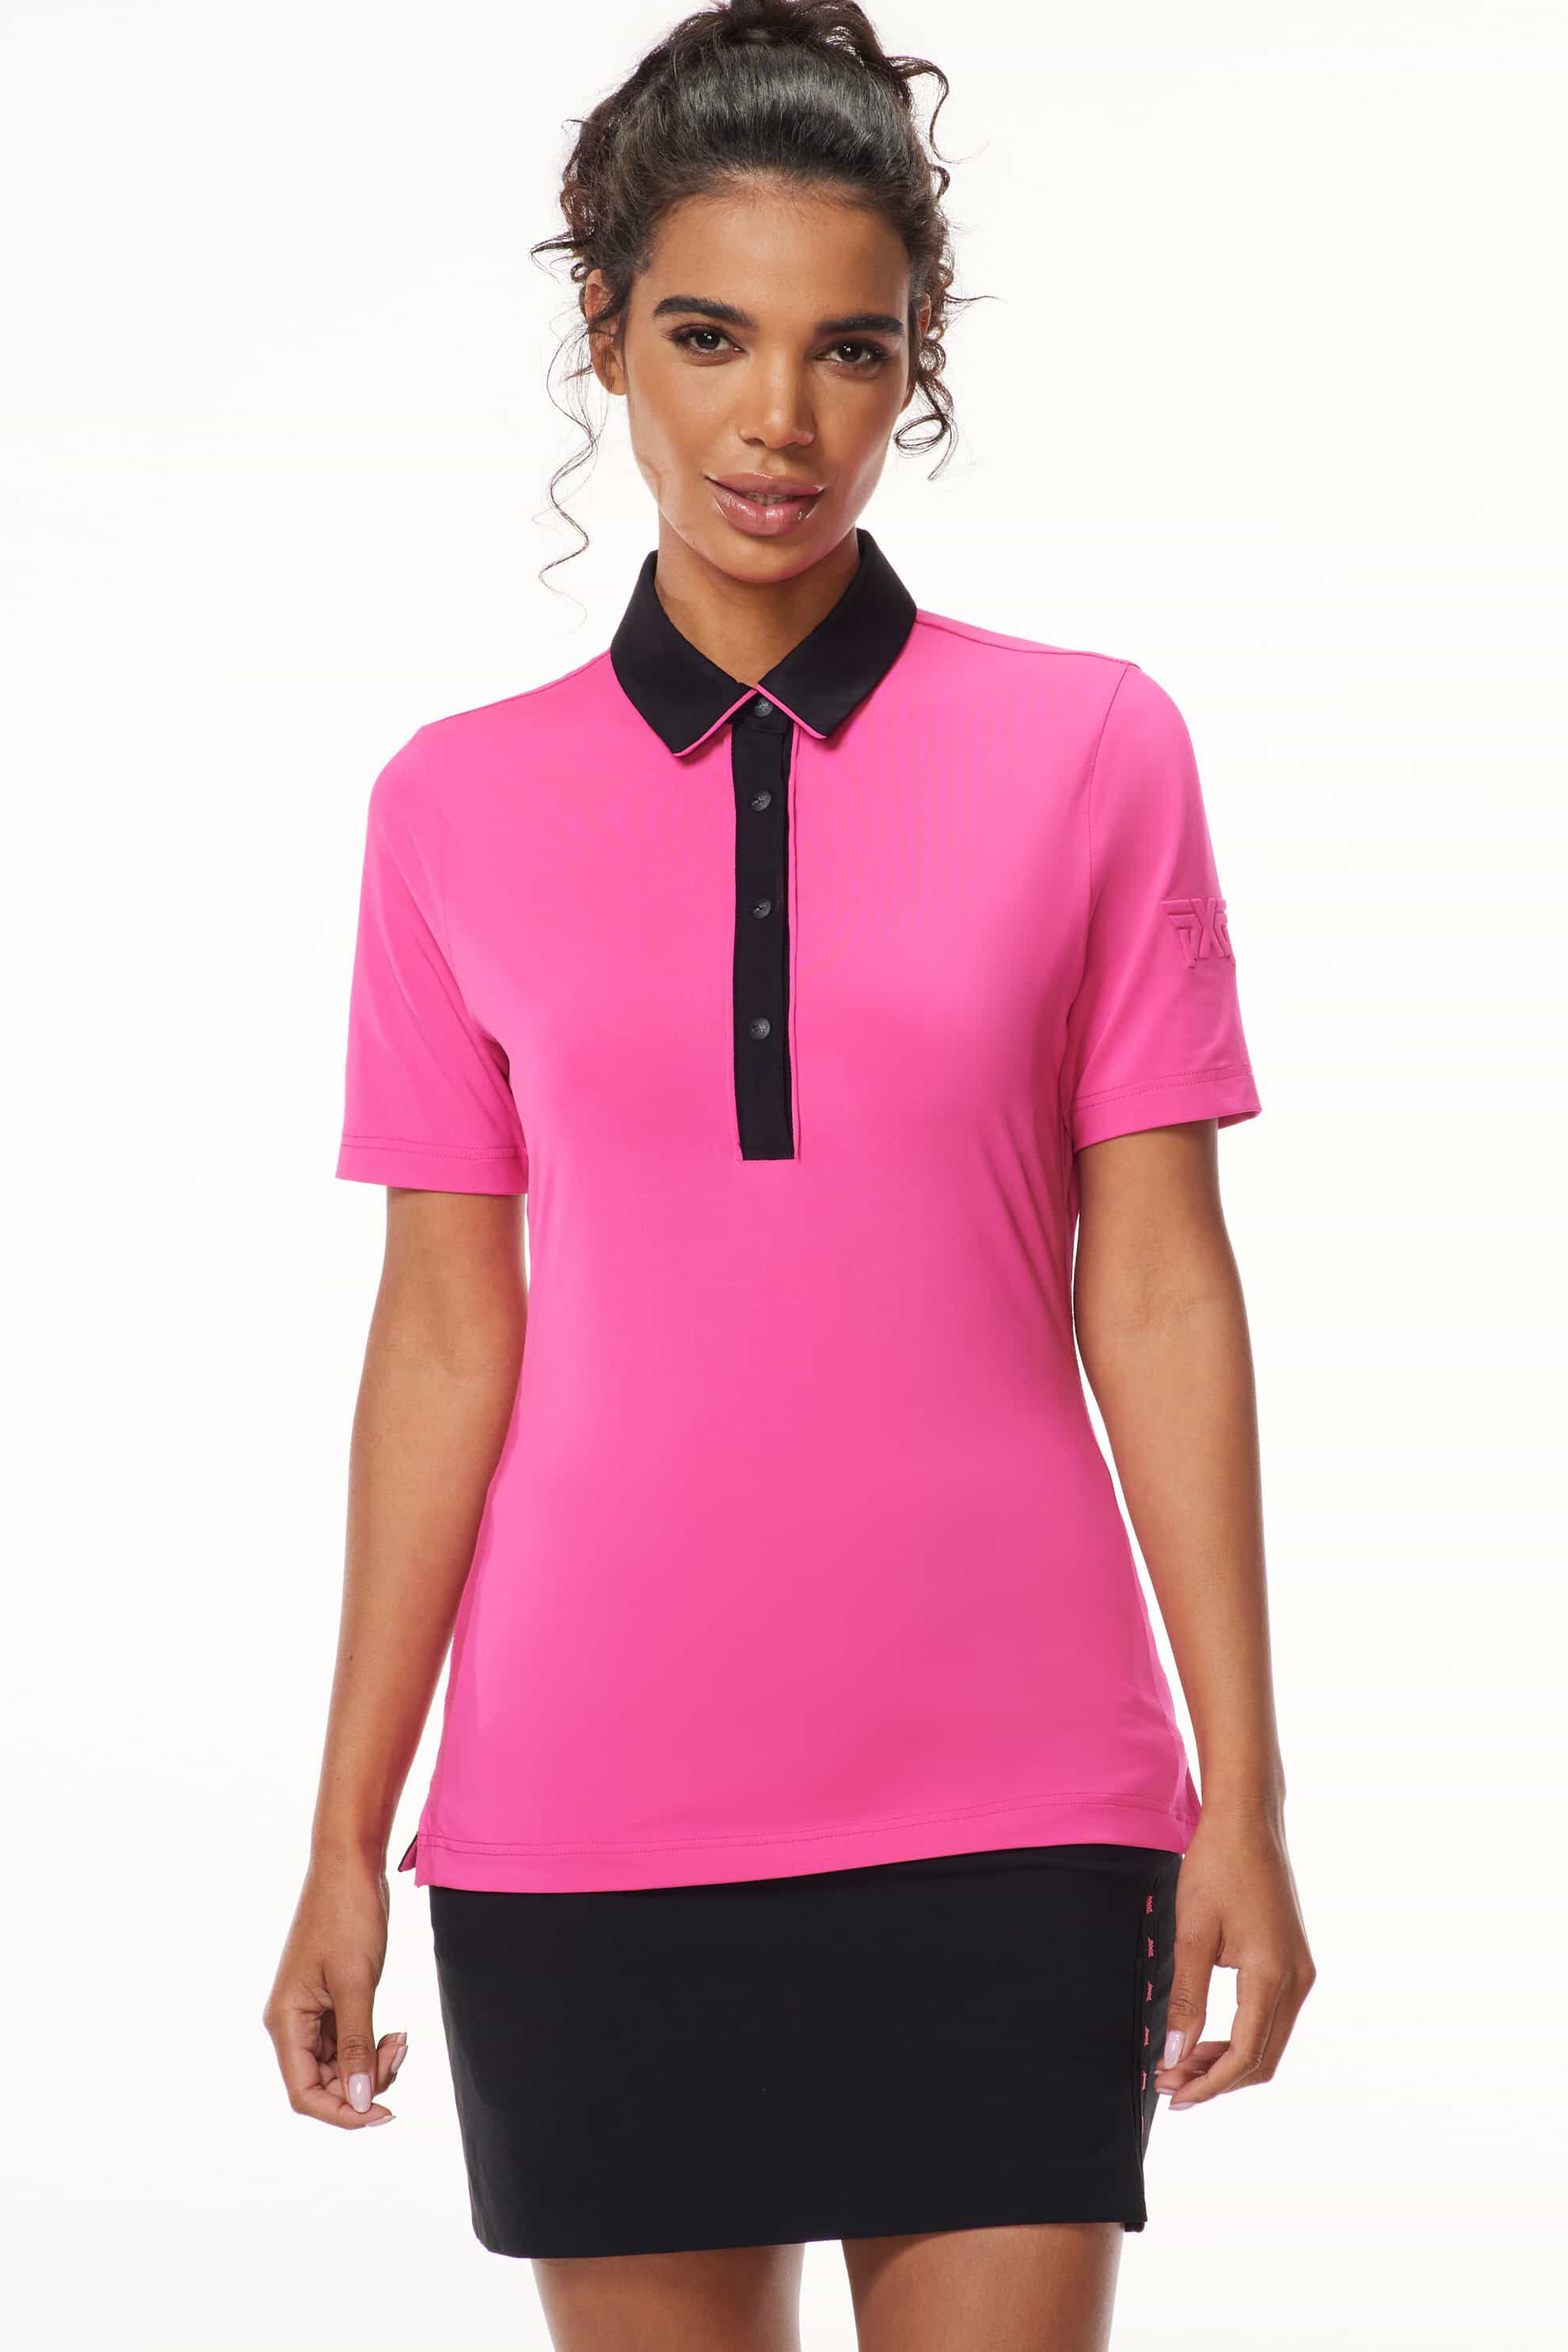 Shop Women's Golf トップス, Shirts and Polos | PXG JP